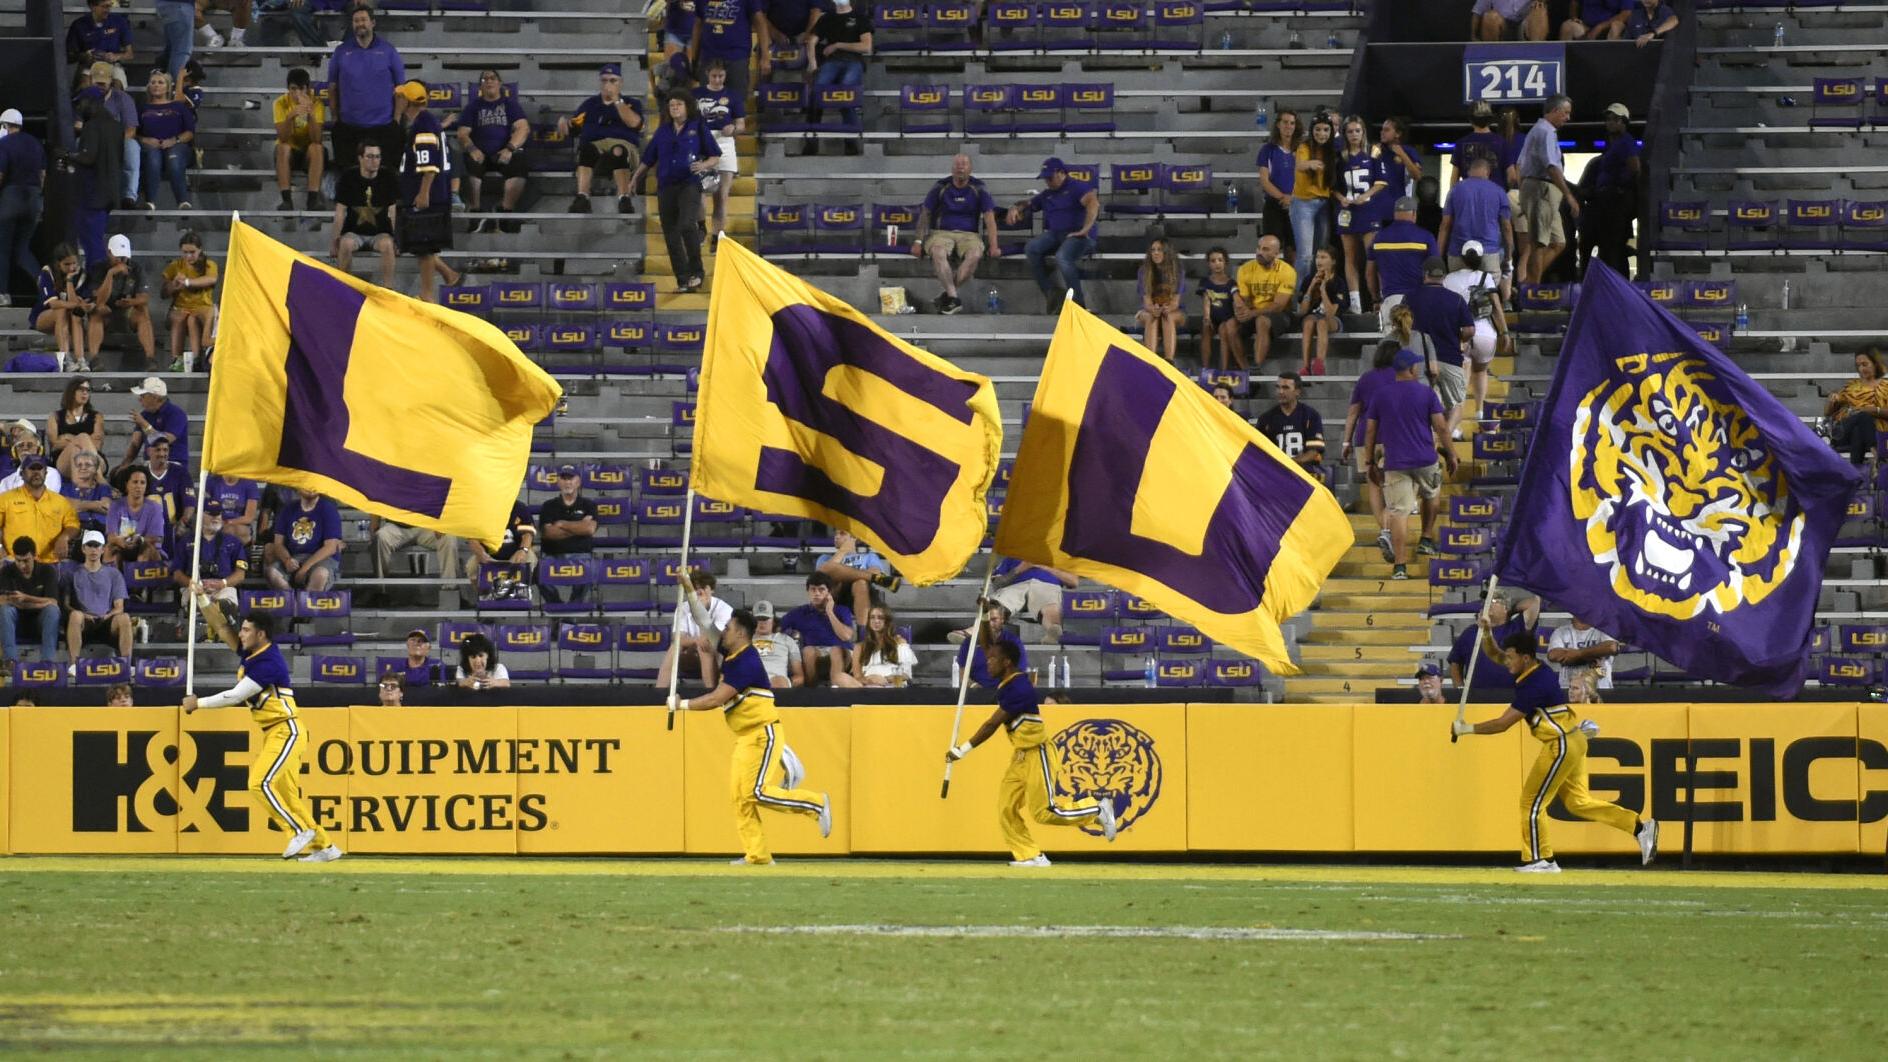 Lsu Football Schedule For 2022 Ready For 2022? Lsu Football Schedule Released; See The Tigers' Key Dates,  Opponents | Lsu | Theadvocate.com